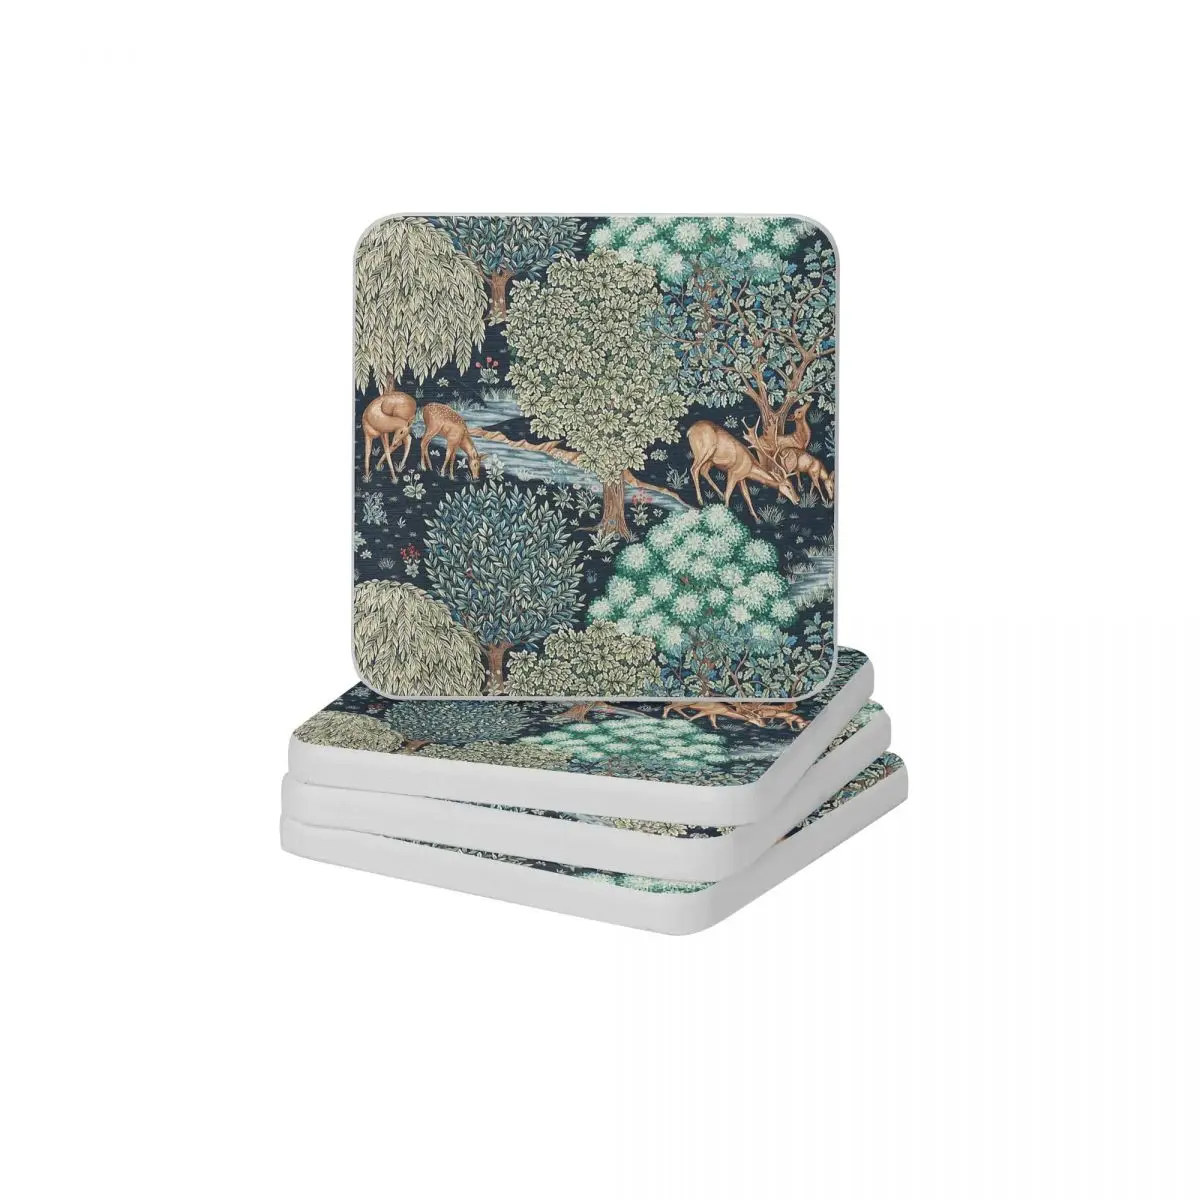 

FOREST ANIMALS DEERS A BROOK Blue Green Floral Diatomite Square Round Coaster Non-slip Cup Bonsai Mat Soap Pad Diameter 10cm